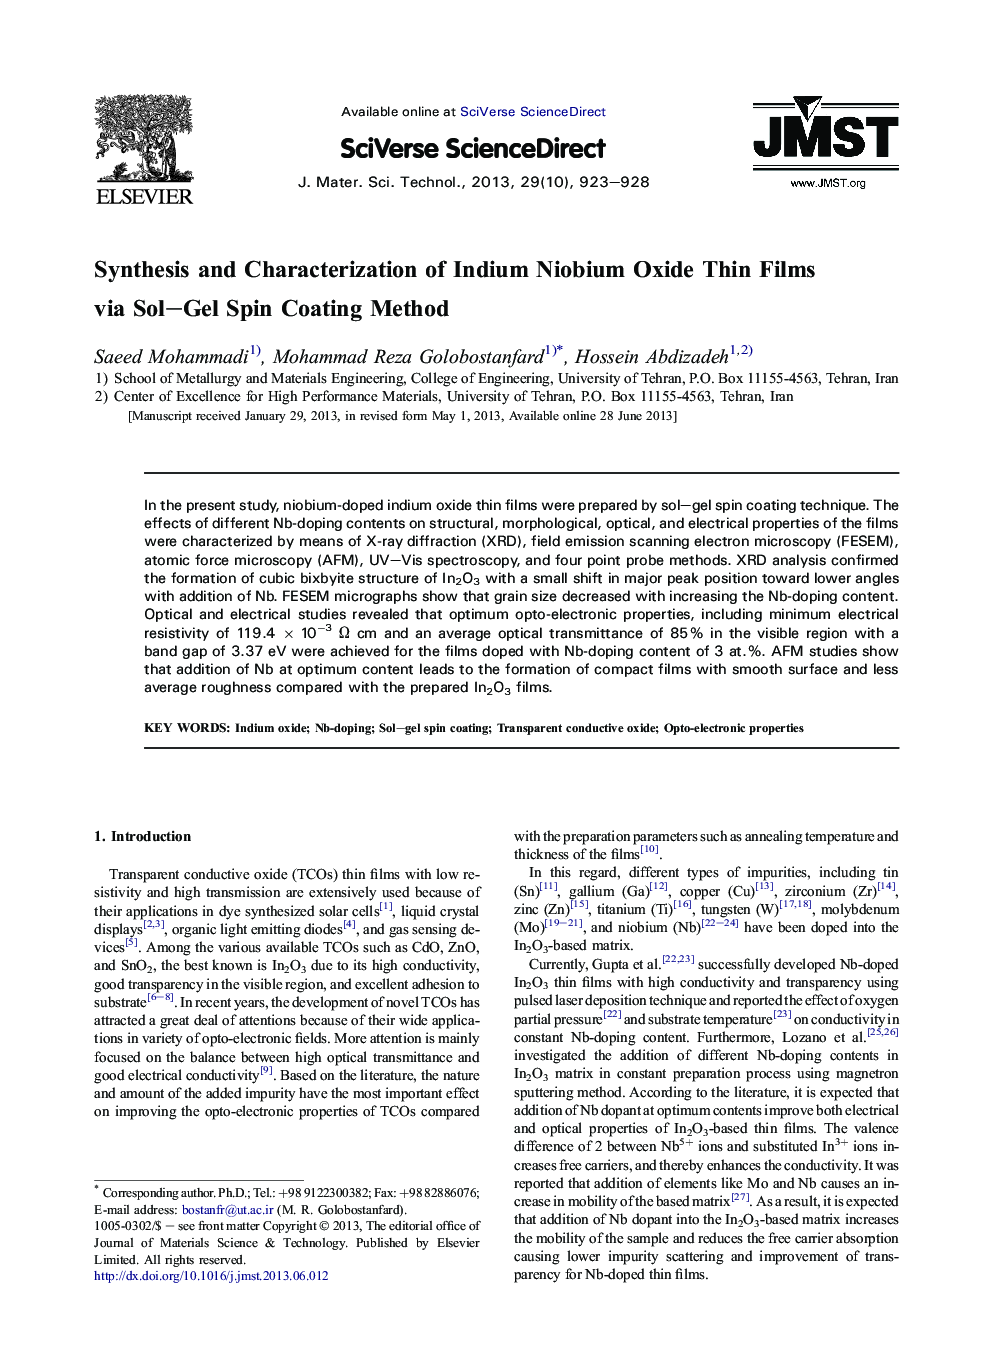 Synthesis and Characterization of Indium Niobium Oxide Thin Films via Sol–Gel Spin Coating Method